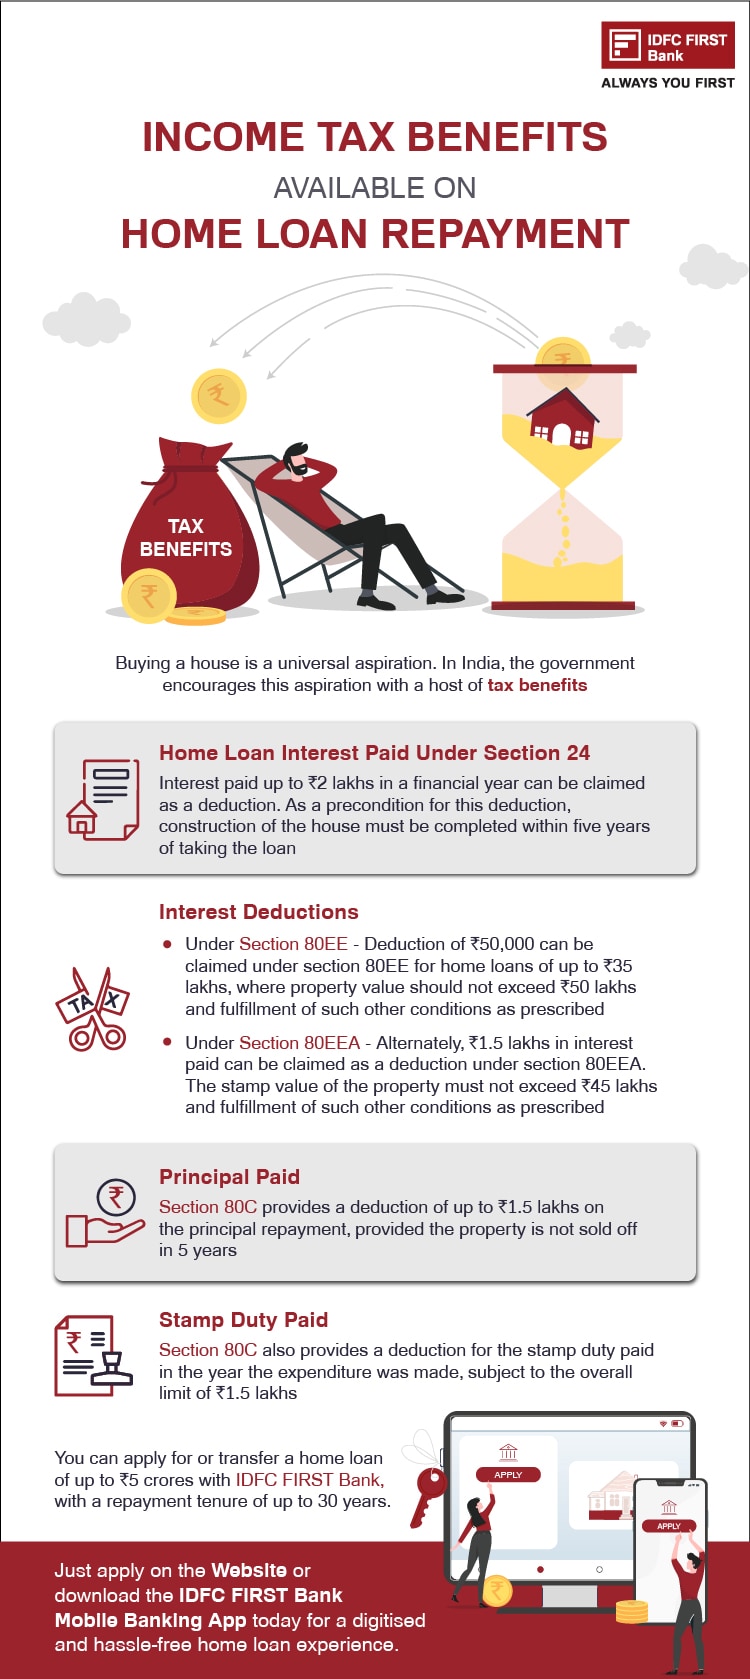 home-loan-tax-benefits-interest-on-home-loan-section-24-and